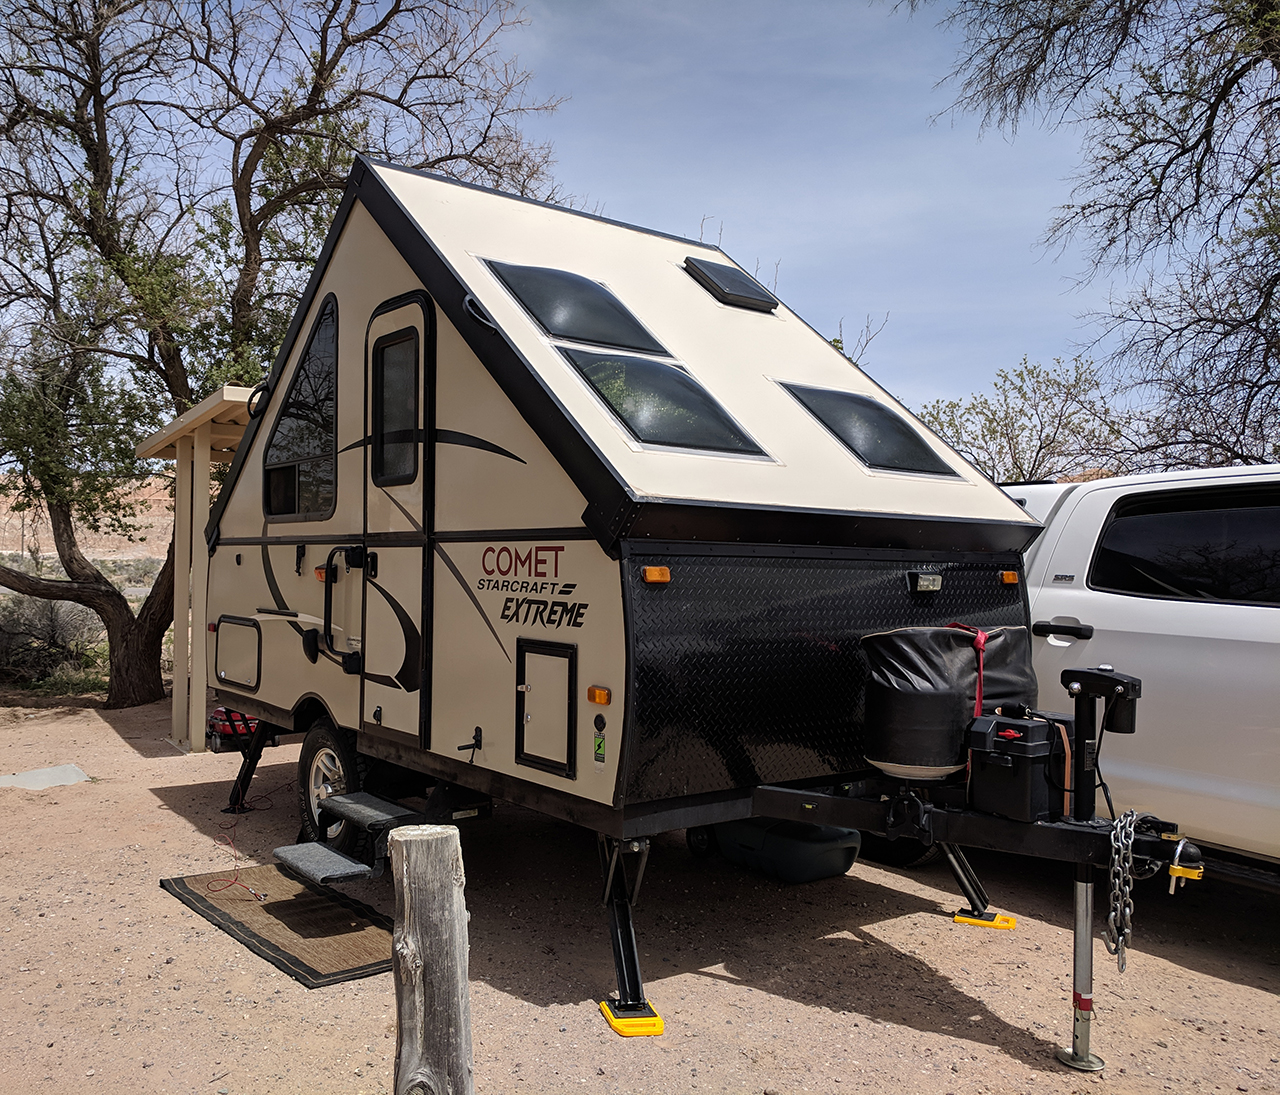 a-frame pop up camper set up in with desert landscaping surround it